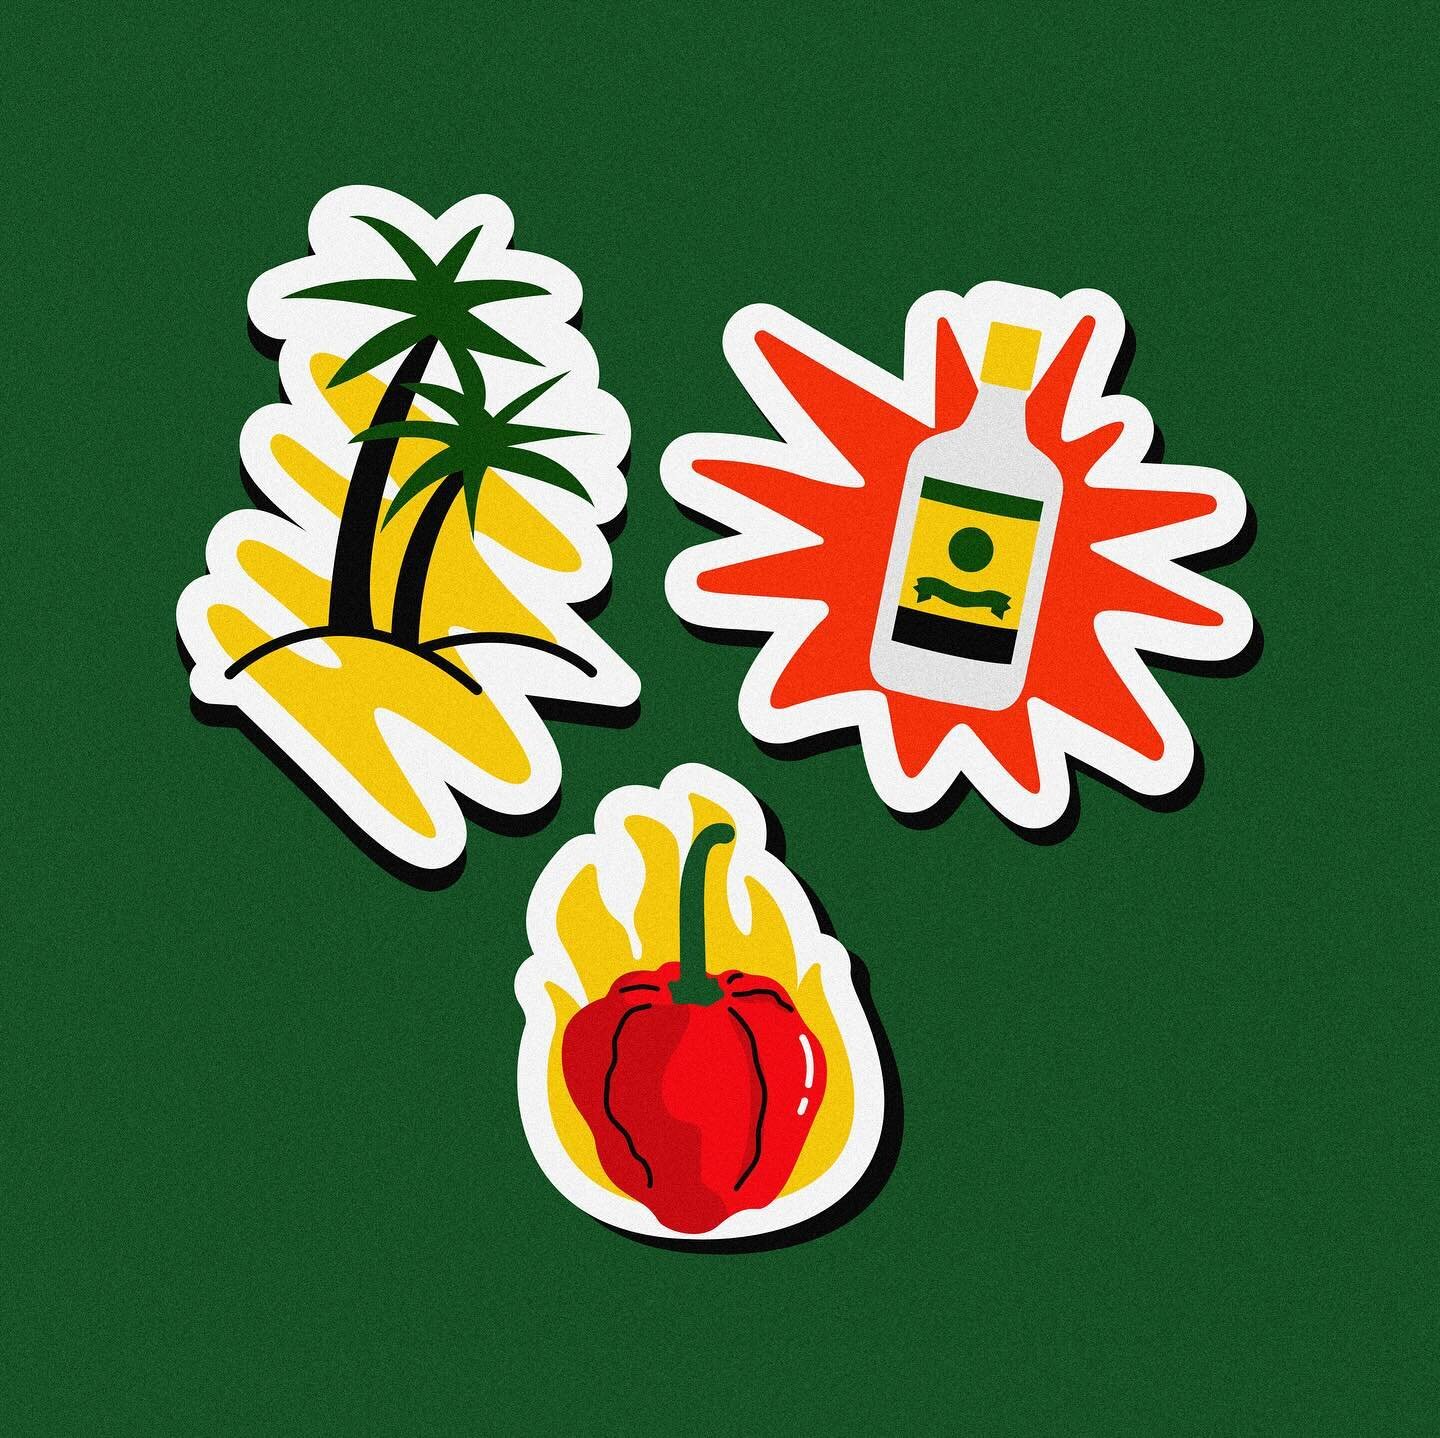 On-brand vector stickers for an Afro-Carribean restaurant. 
✨
Icons and stickers that are cohesive with your brand, give your brand identity an extra sprinkle of personality without doing too much or too little!
✨
Drop me a message if you'd like to d